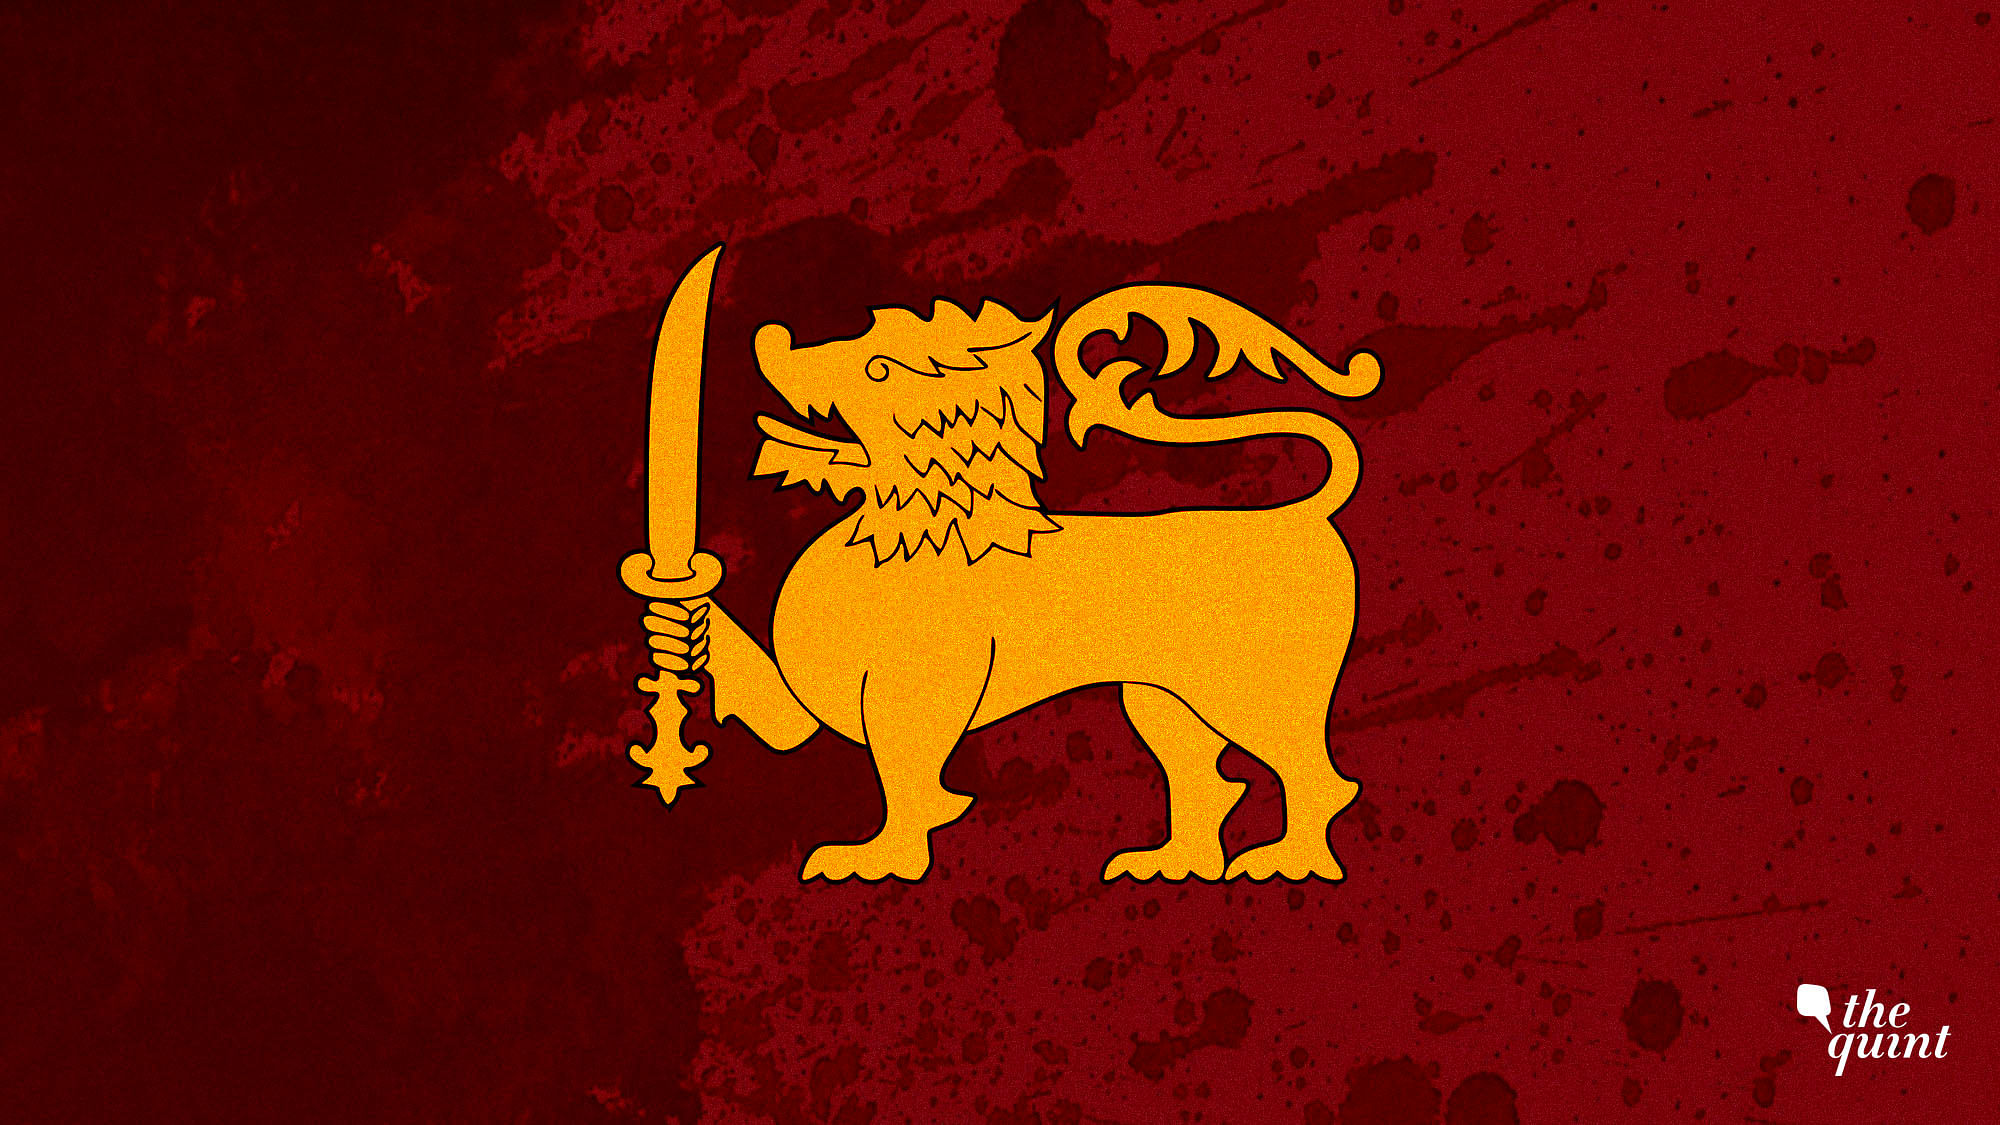 Image of Sri Lankan flag’s centrepiece – the gold lion – used for representational purposes.